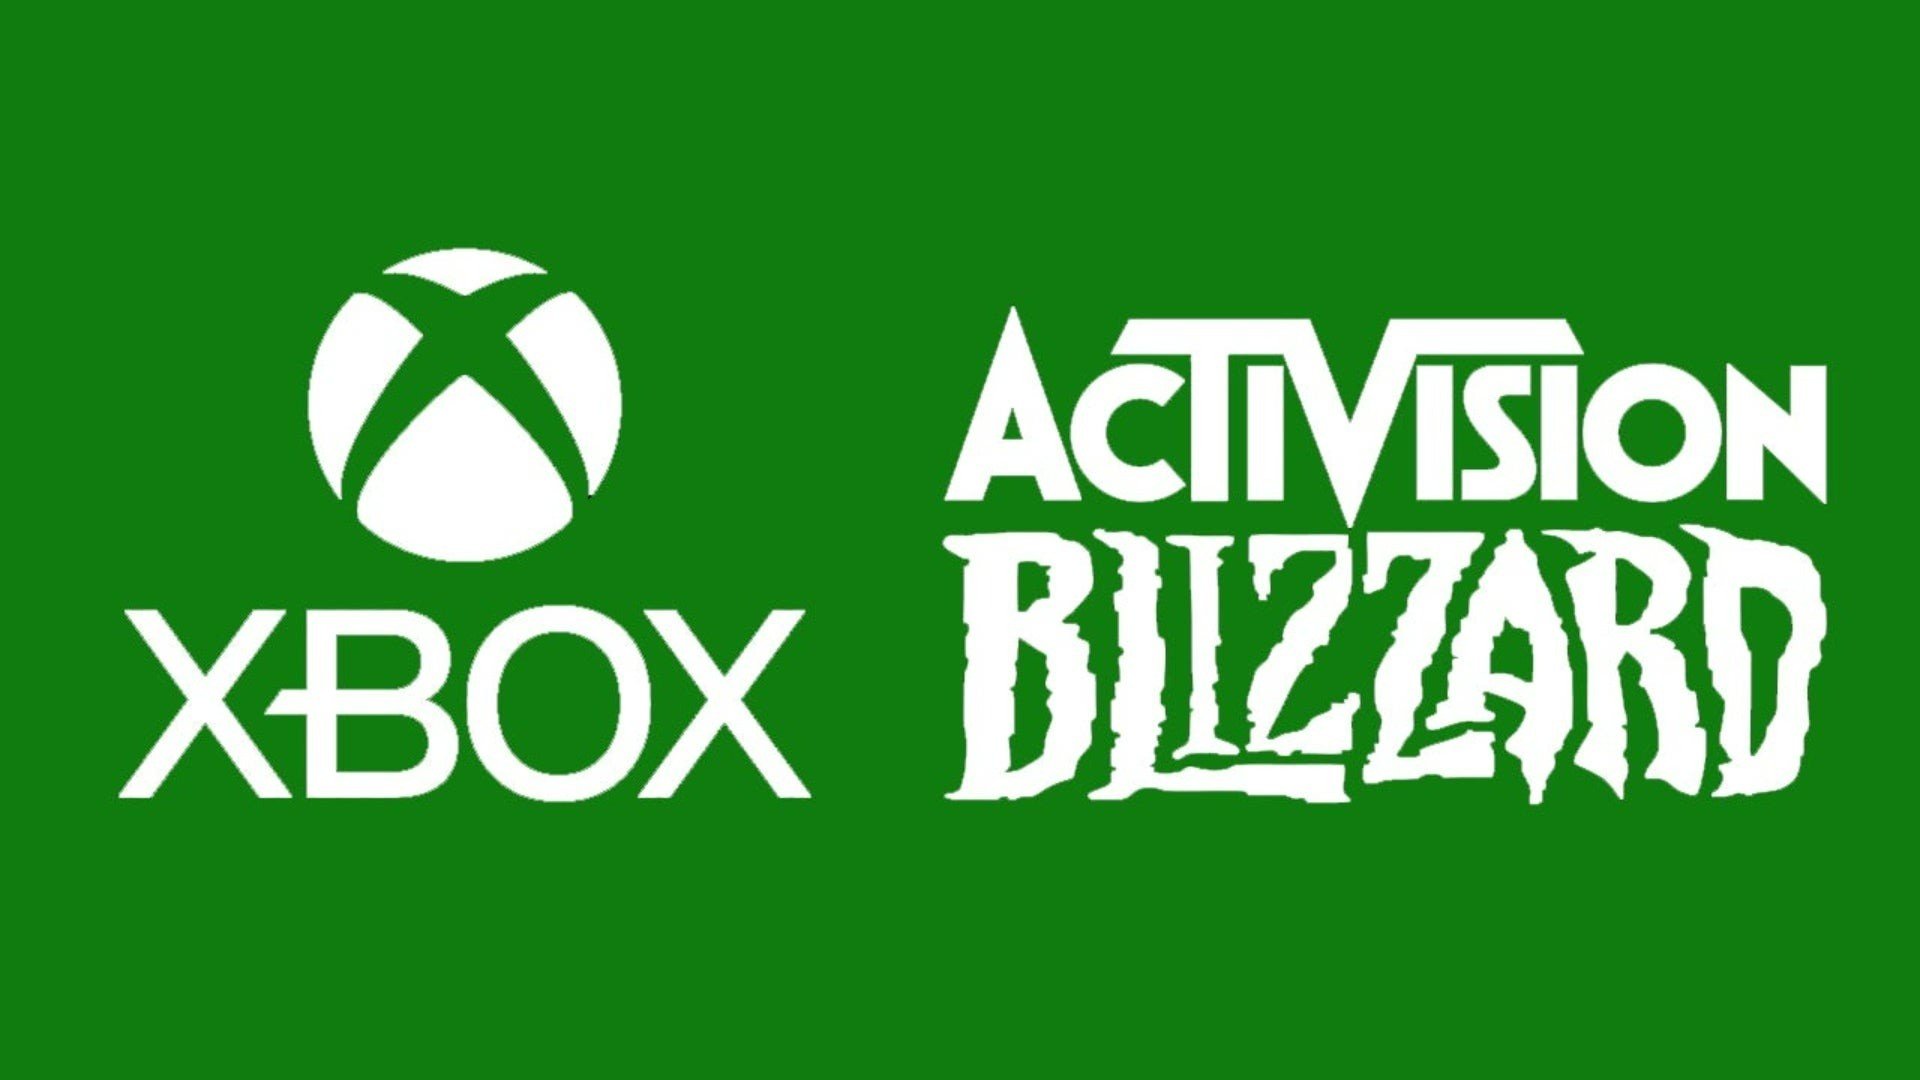 Microsoft may withdraw from UK to complete Activision acquisition of Blizzard